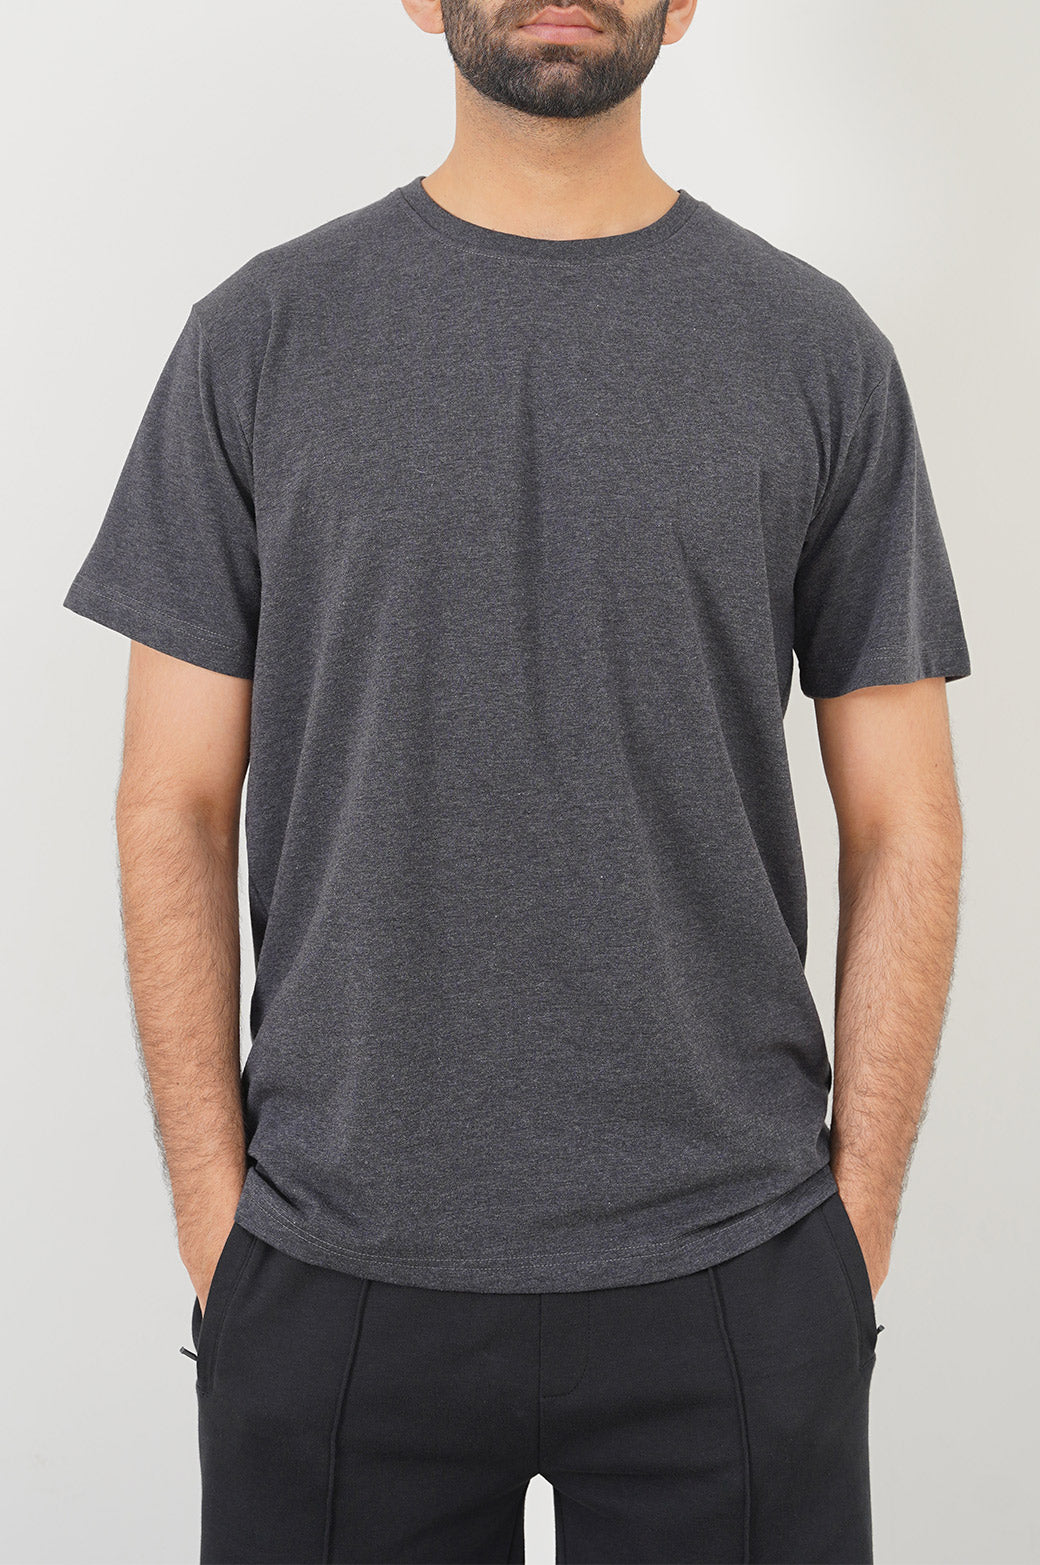 HEATHER CHARCOAL BROUND NECK T-SHIRT